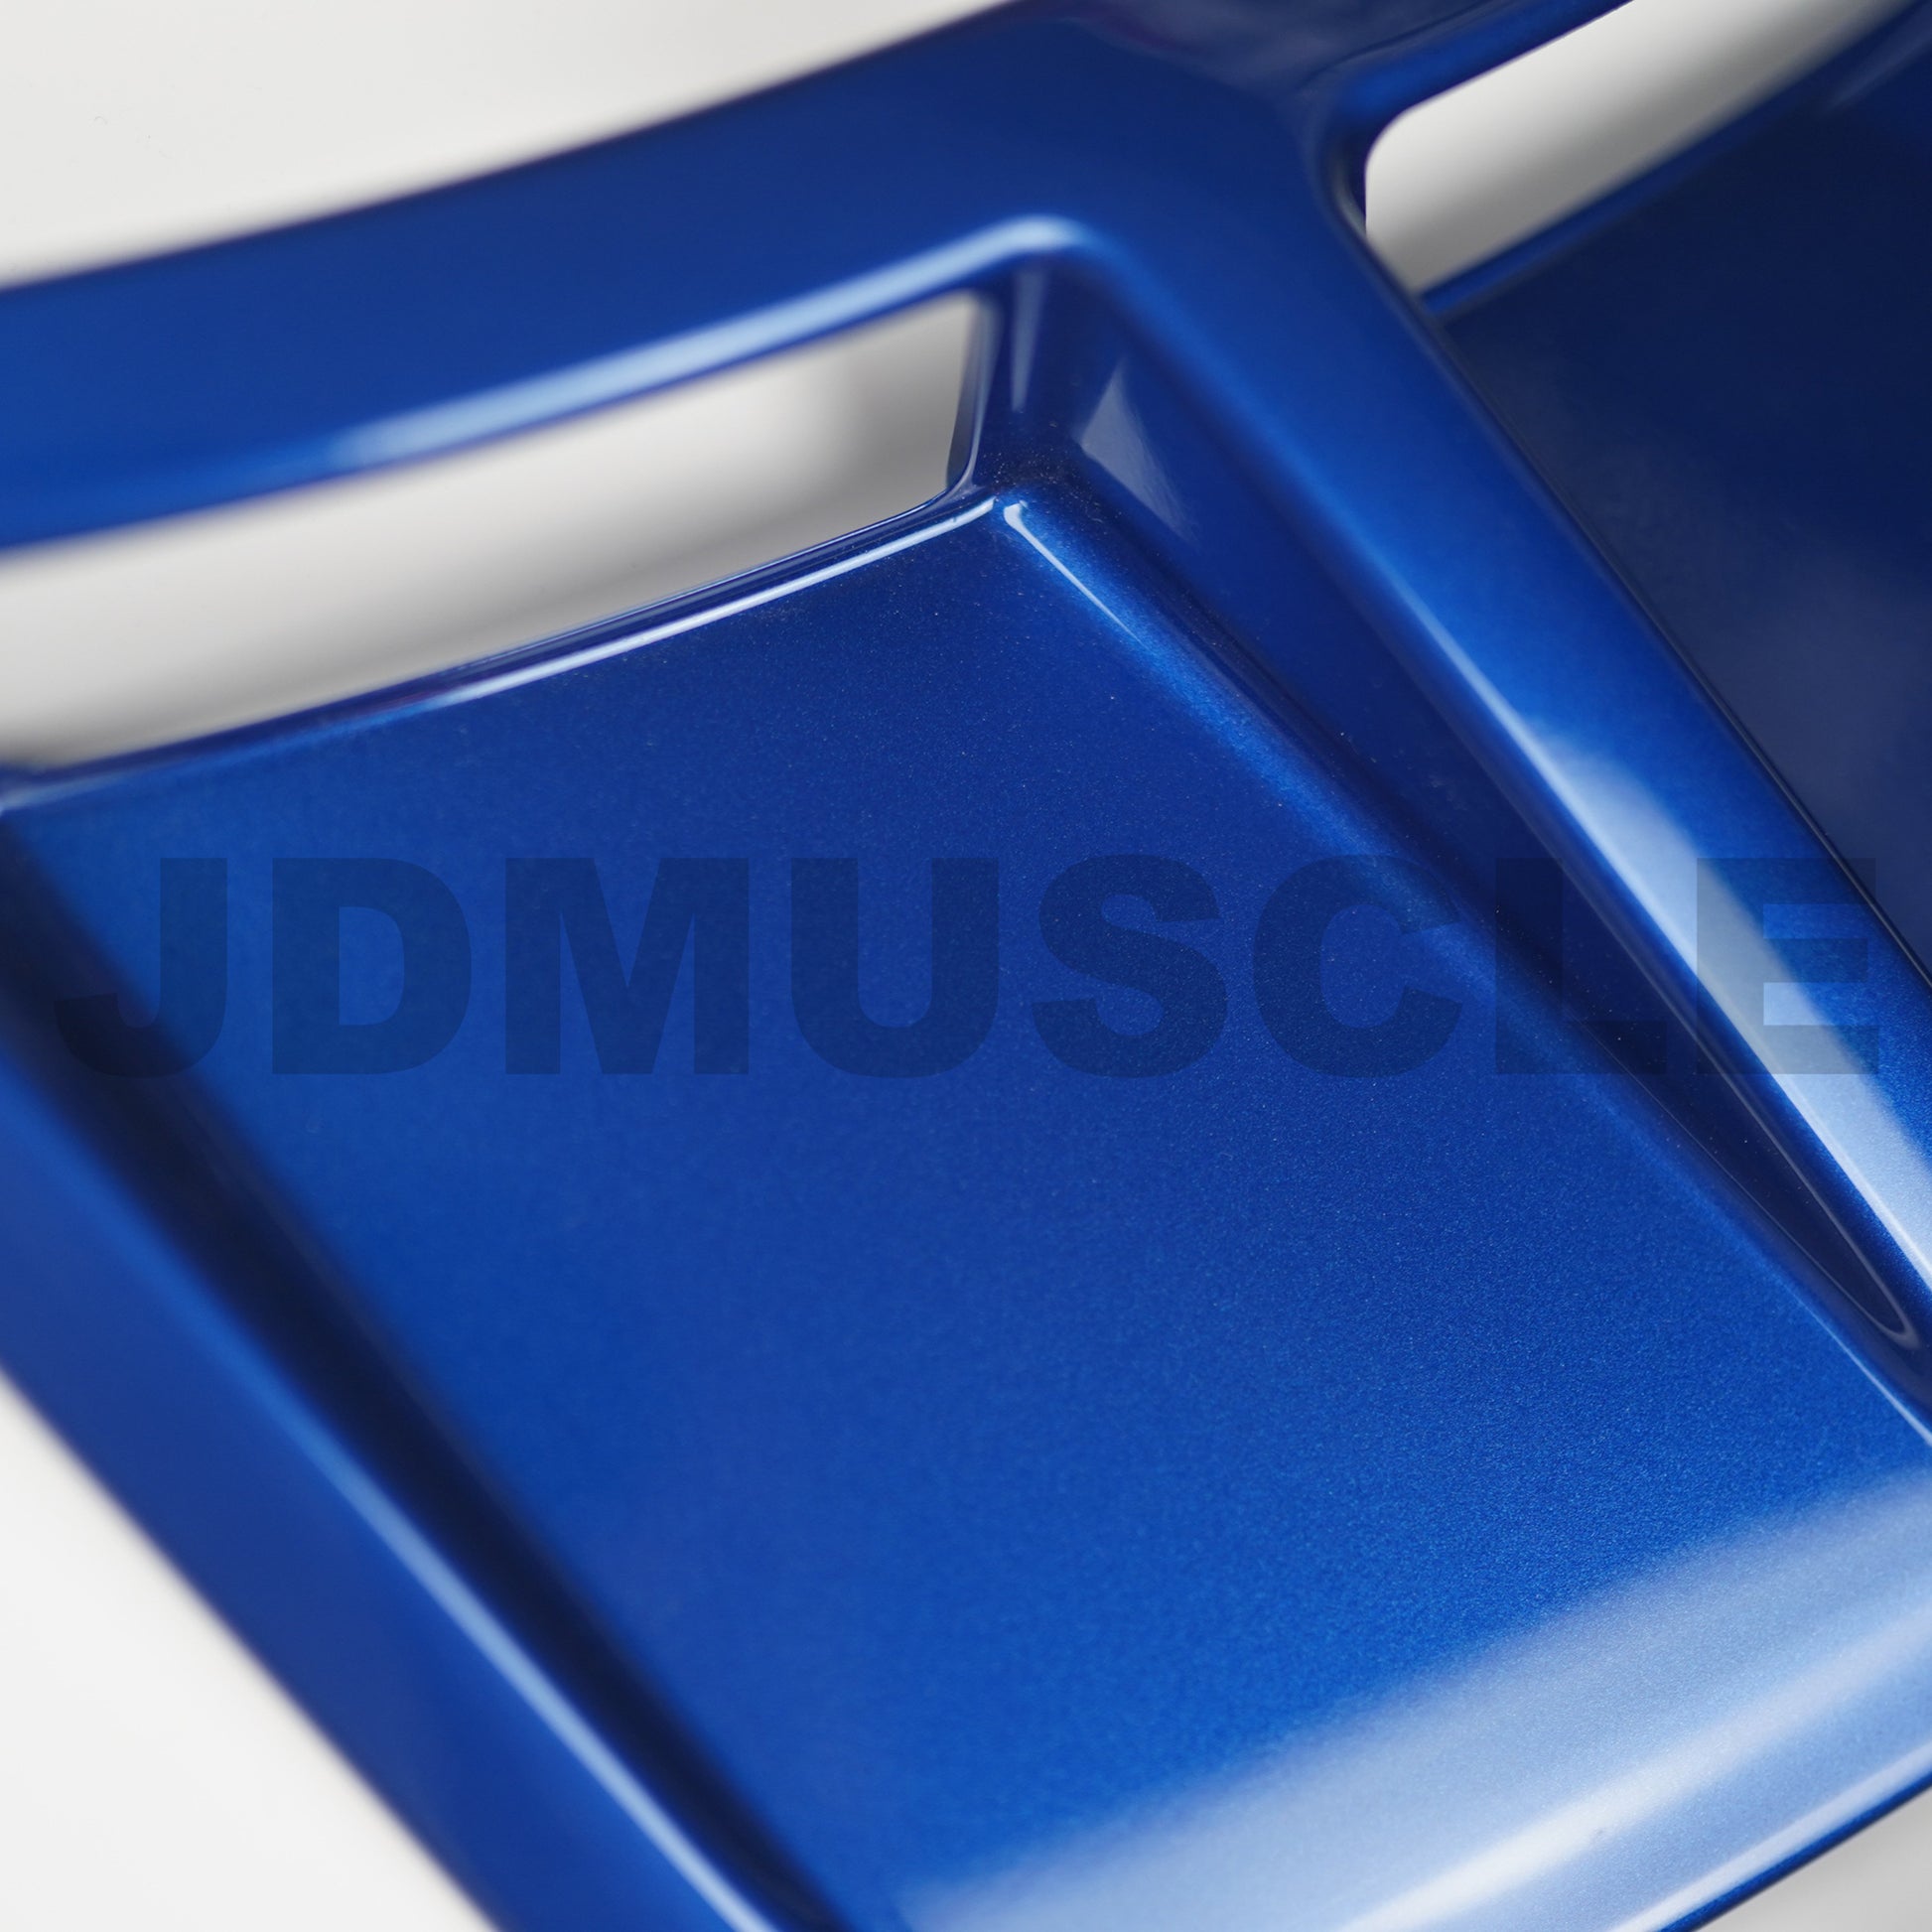 JDMuscle Painted Matched S207 Style Rear Bumper Vents - 2015-2020 WRX/STI-Exterior Garnishes-JDMuscle-JDMuscle